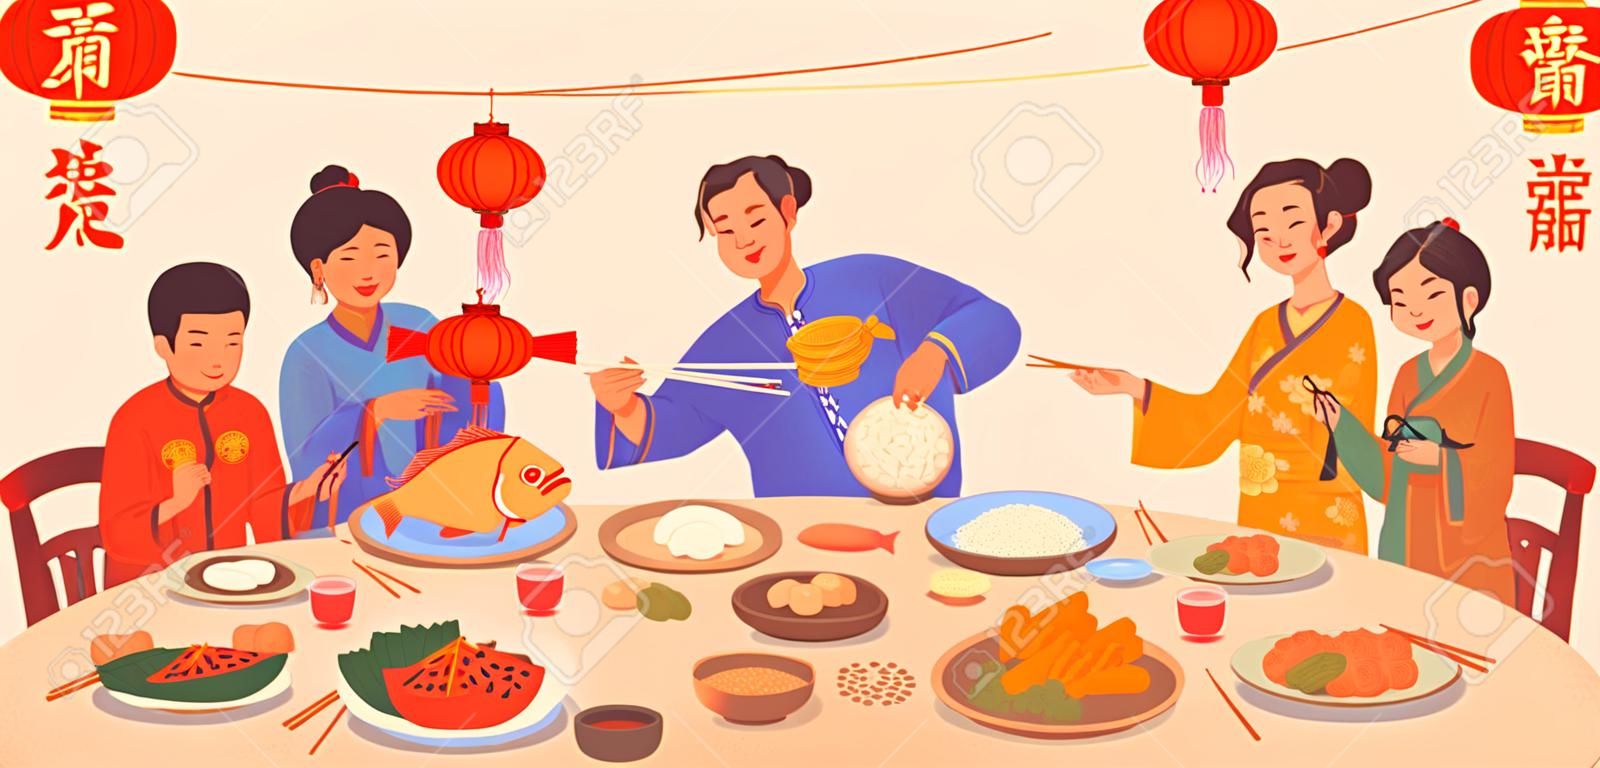 Chinese New Year text translation, gala dinner with food on plates and people hands holding chopsticks, red lanterns decoration. Traditional China cuisine dishes, fish and rice, dumplings, vegetables